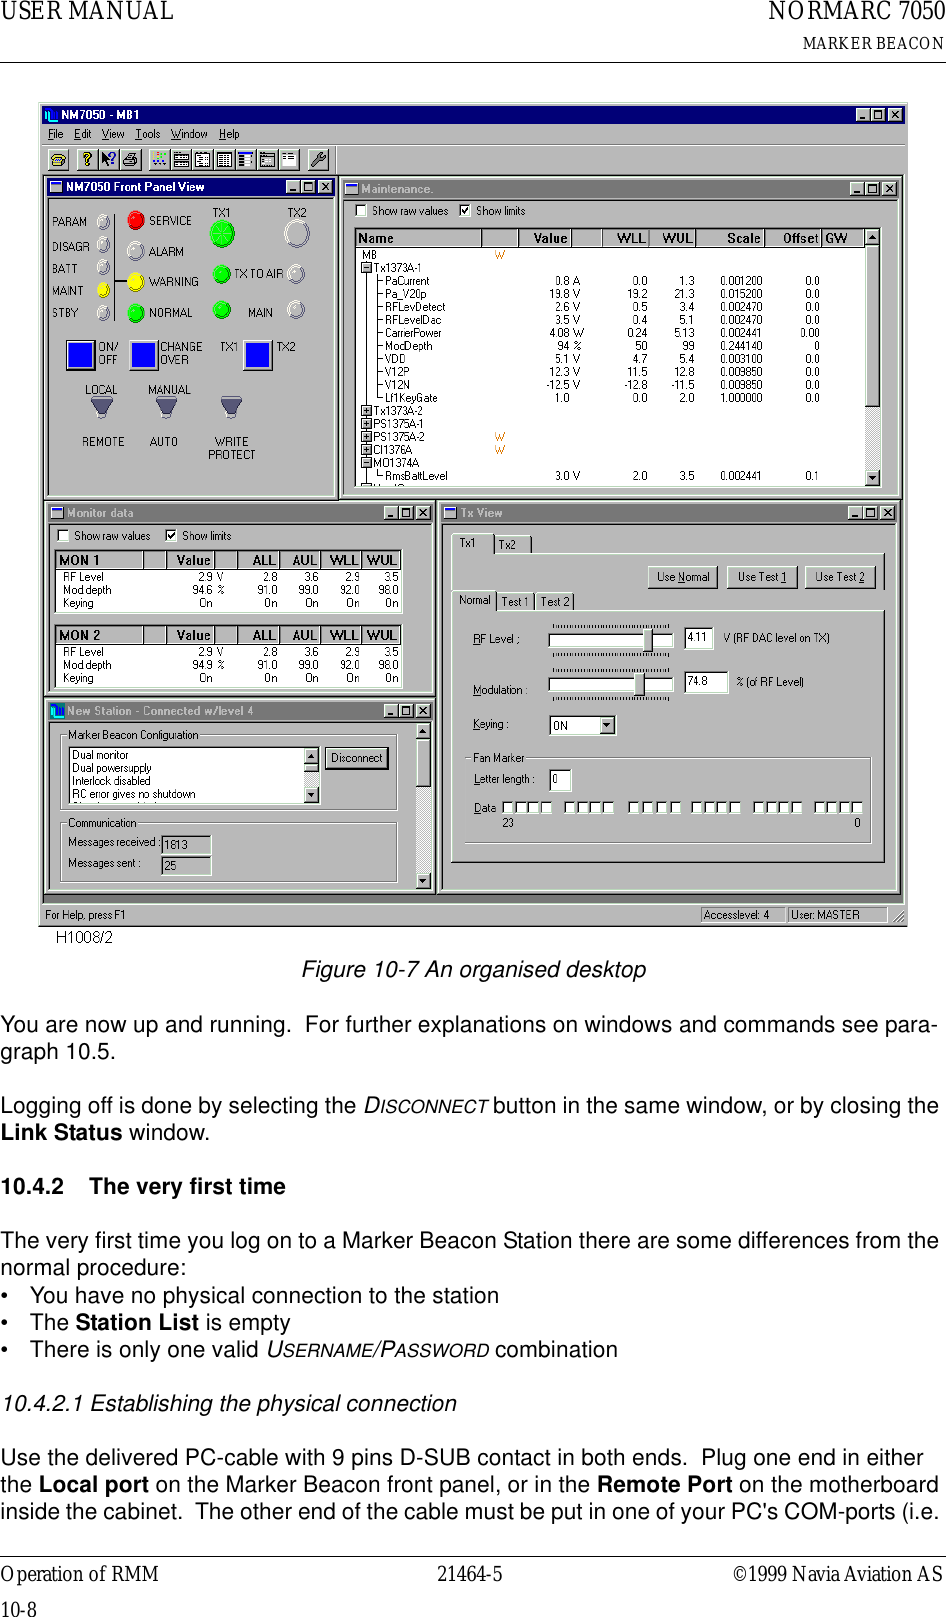 USER MANUAL10-821464-5NORMARC 7050MARKER BEACONOperation of RMM ©1999 Navia Aviation ASFigure 10-7 An organised desktopYou are now up and running.  For further explanations on windows and commands see para-graph 10.5.Logging off is done by selecting the DISCONNECT button in the same window, or by closing the Link Status window.10.4.2 The very first timeThe very first time you log on to a Marker Beacon Station there are some differences from the normal procedure:• You have no physical connection to the station• The Station List is empty• There is only one valid USERNAME/PASSWORD combination10.4.2.1 Establishing the physical connectionUse the delivered PC-cable with 9 pins D-SUB contact in both ends.  Plug one end in either the Local port on the Marker Beacon front panel, or in the Remote Port on the motherboard inside the cabinet.  The other end of the cable must be put in one of your PC&apos;s COM-ports (i.e. 